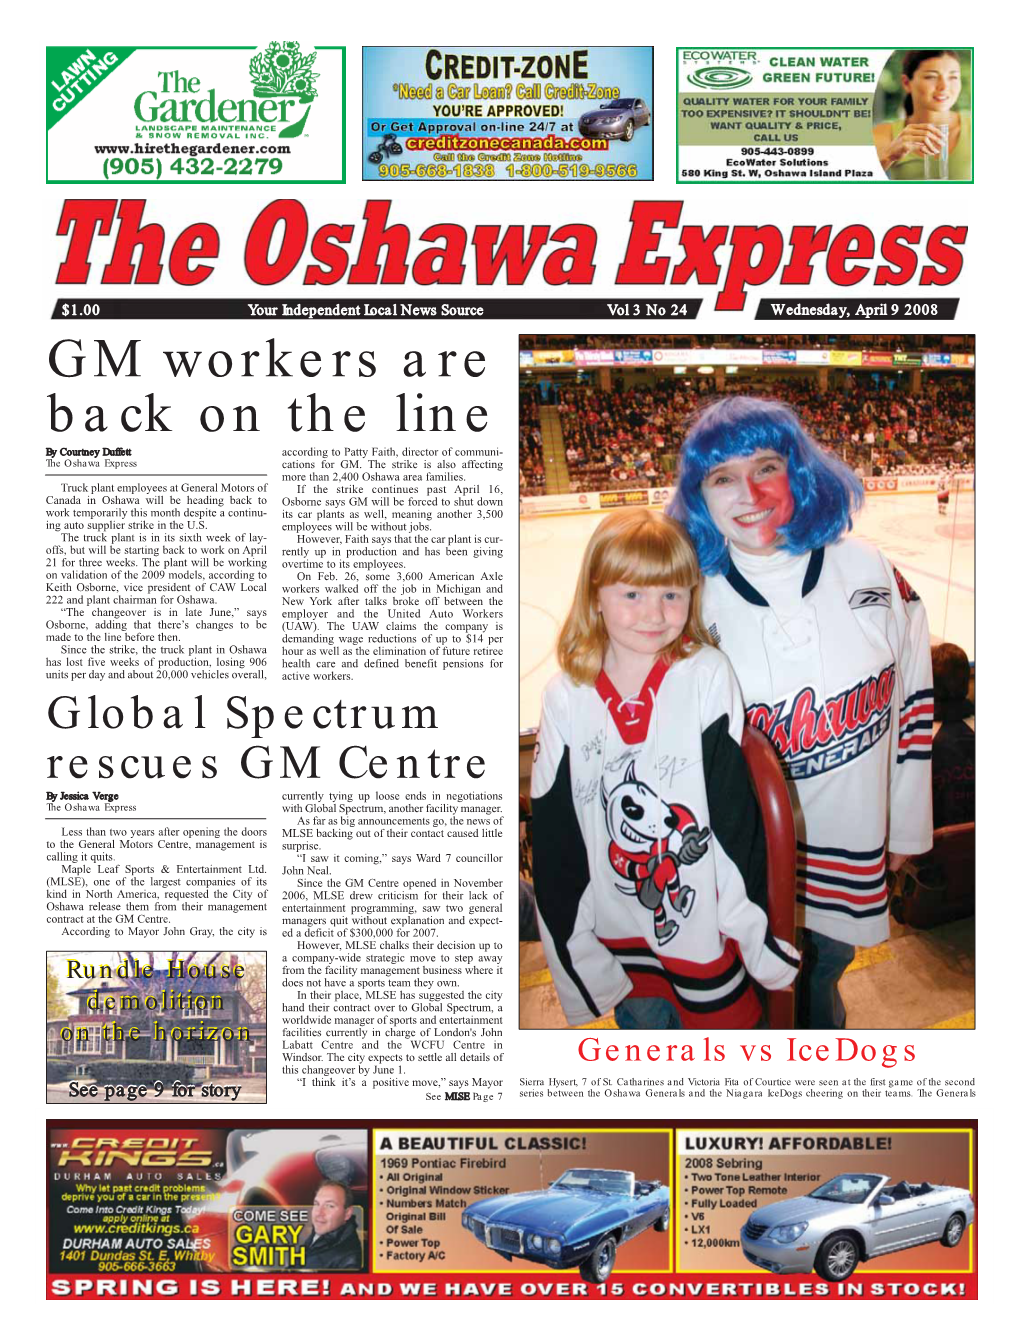 GM Workers Are Back on the Line by Courtney Duffett According to Patty Faith, Director of Communi- the Oshawa Express Cations for GM